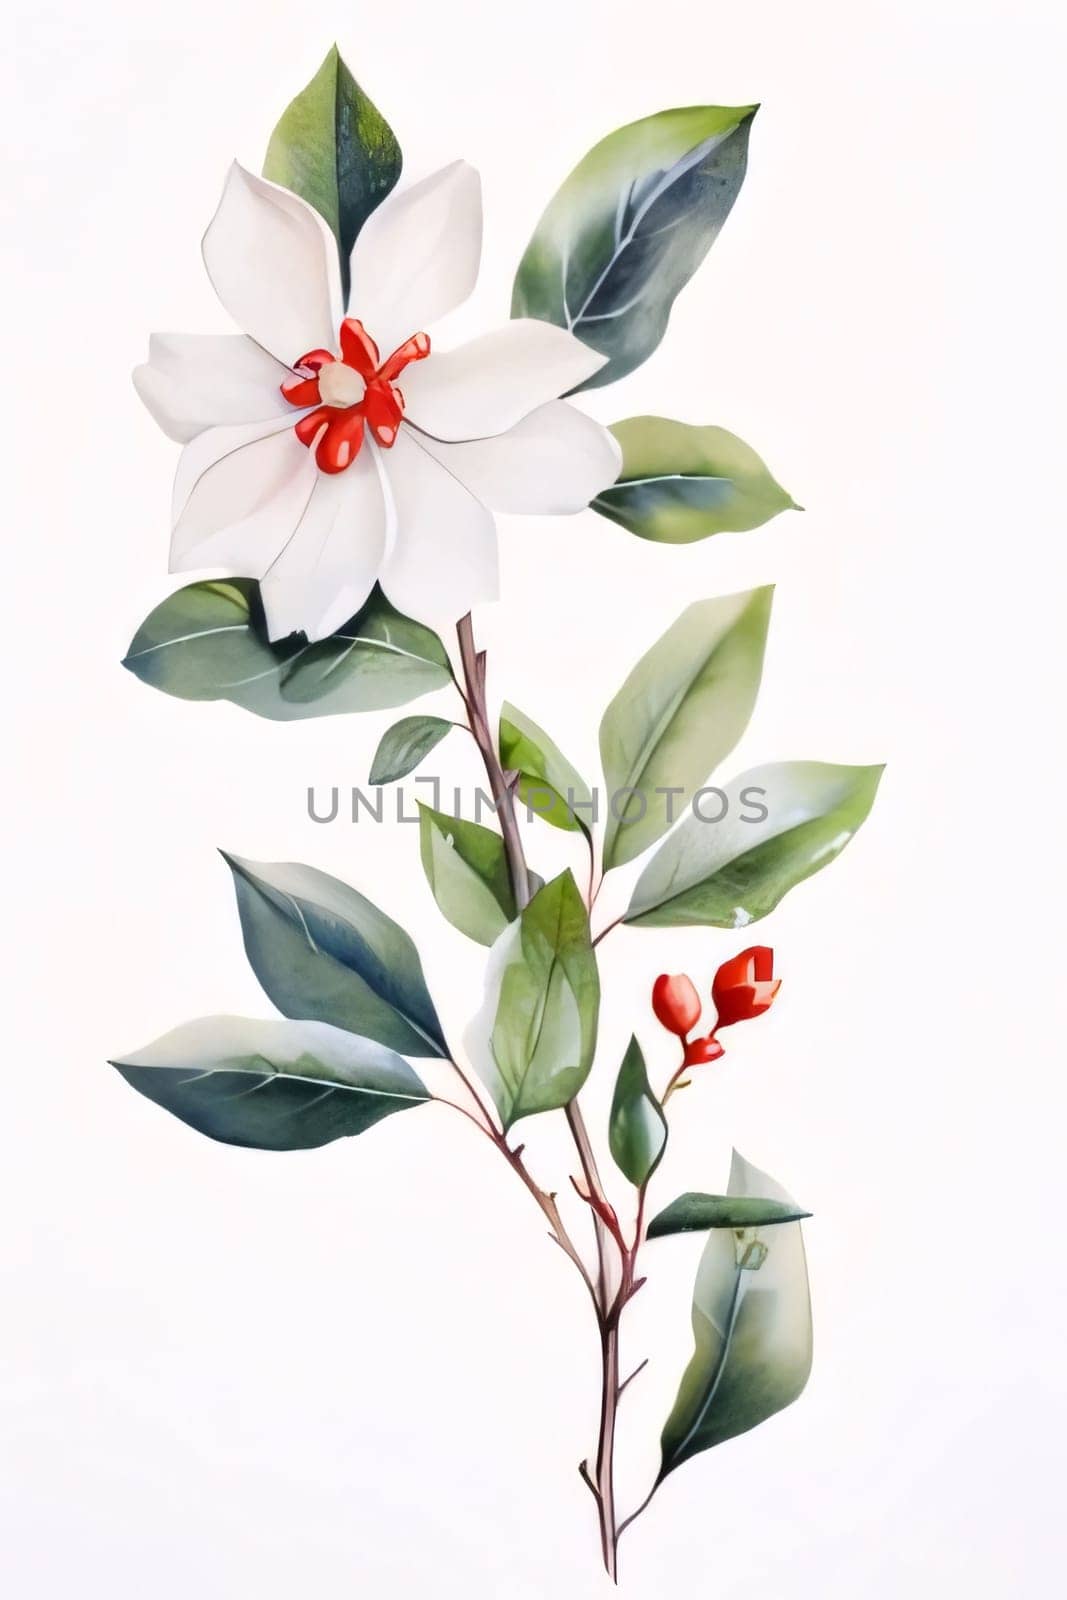 Drawn, painted lily of the valley flower on isolated white background. Flowering flowers, a symbol of spring, new life. A joyful time of nature waking up to life.